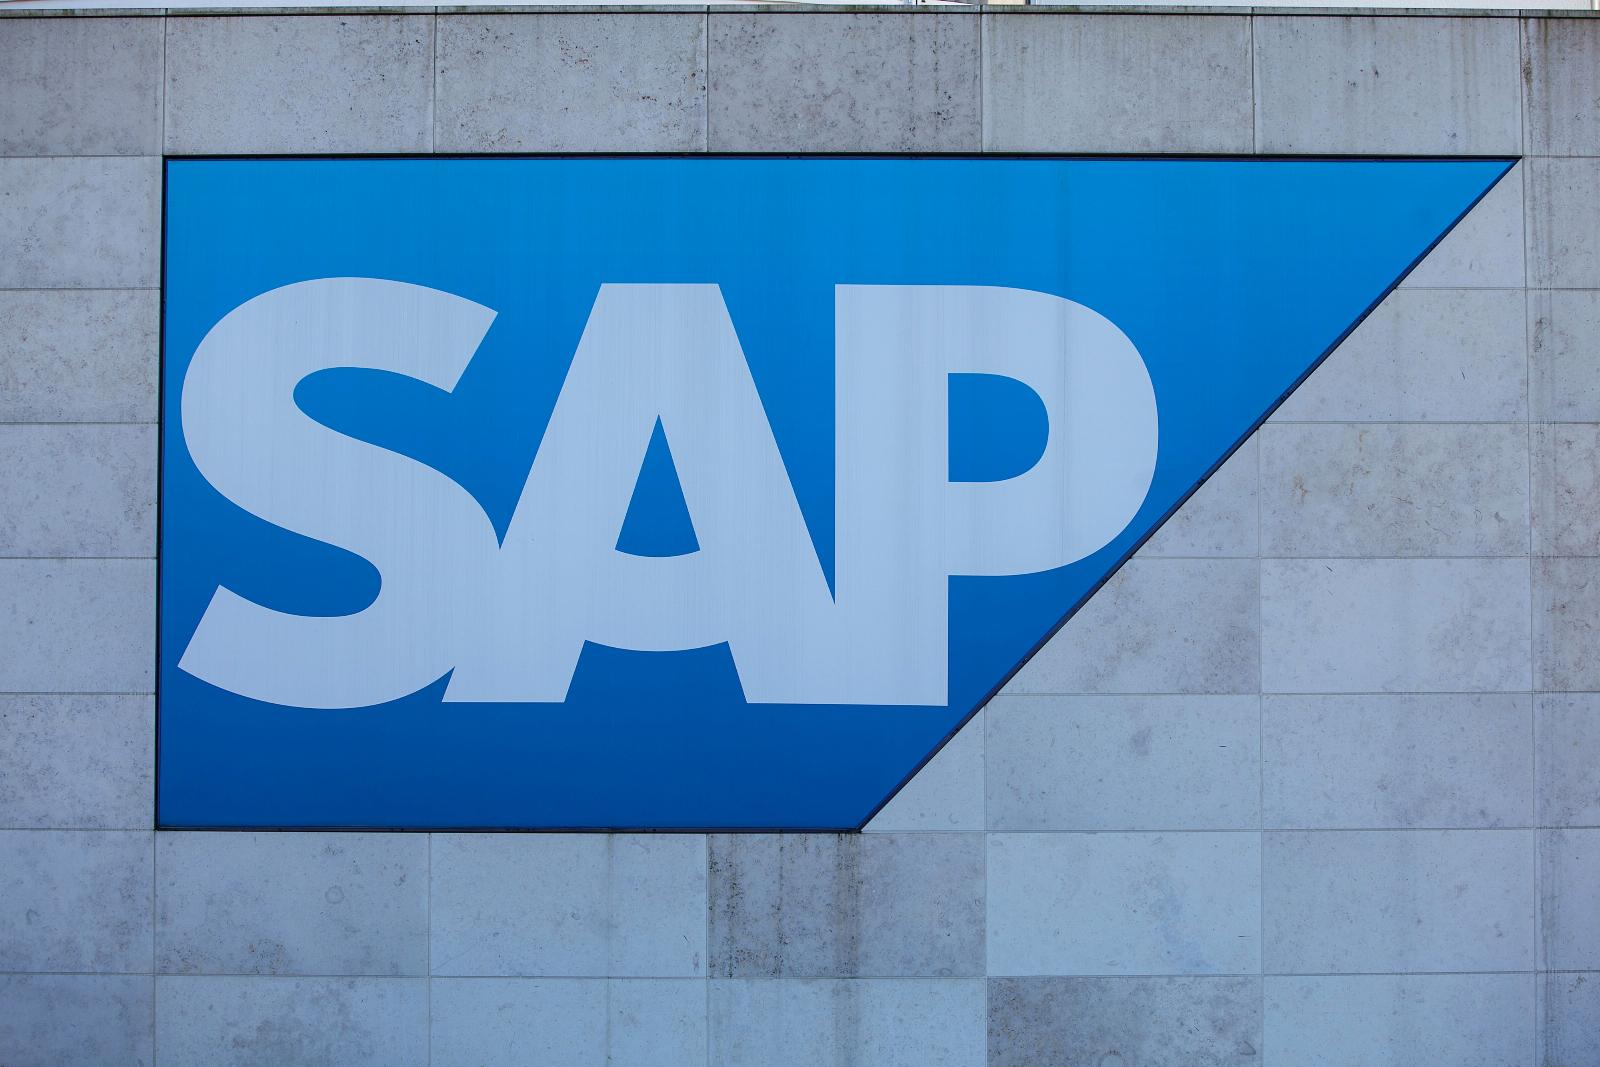 SAP invests in generative AI startups Anthropic, Cohere and Aleph Alpha